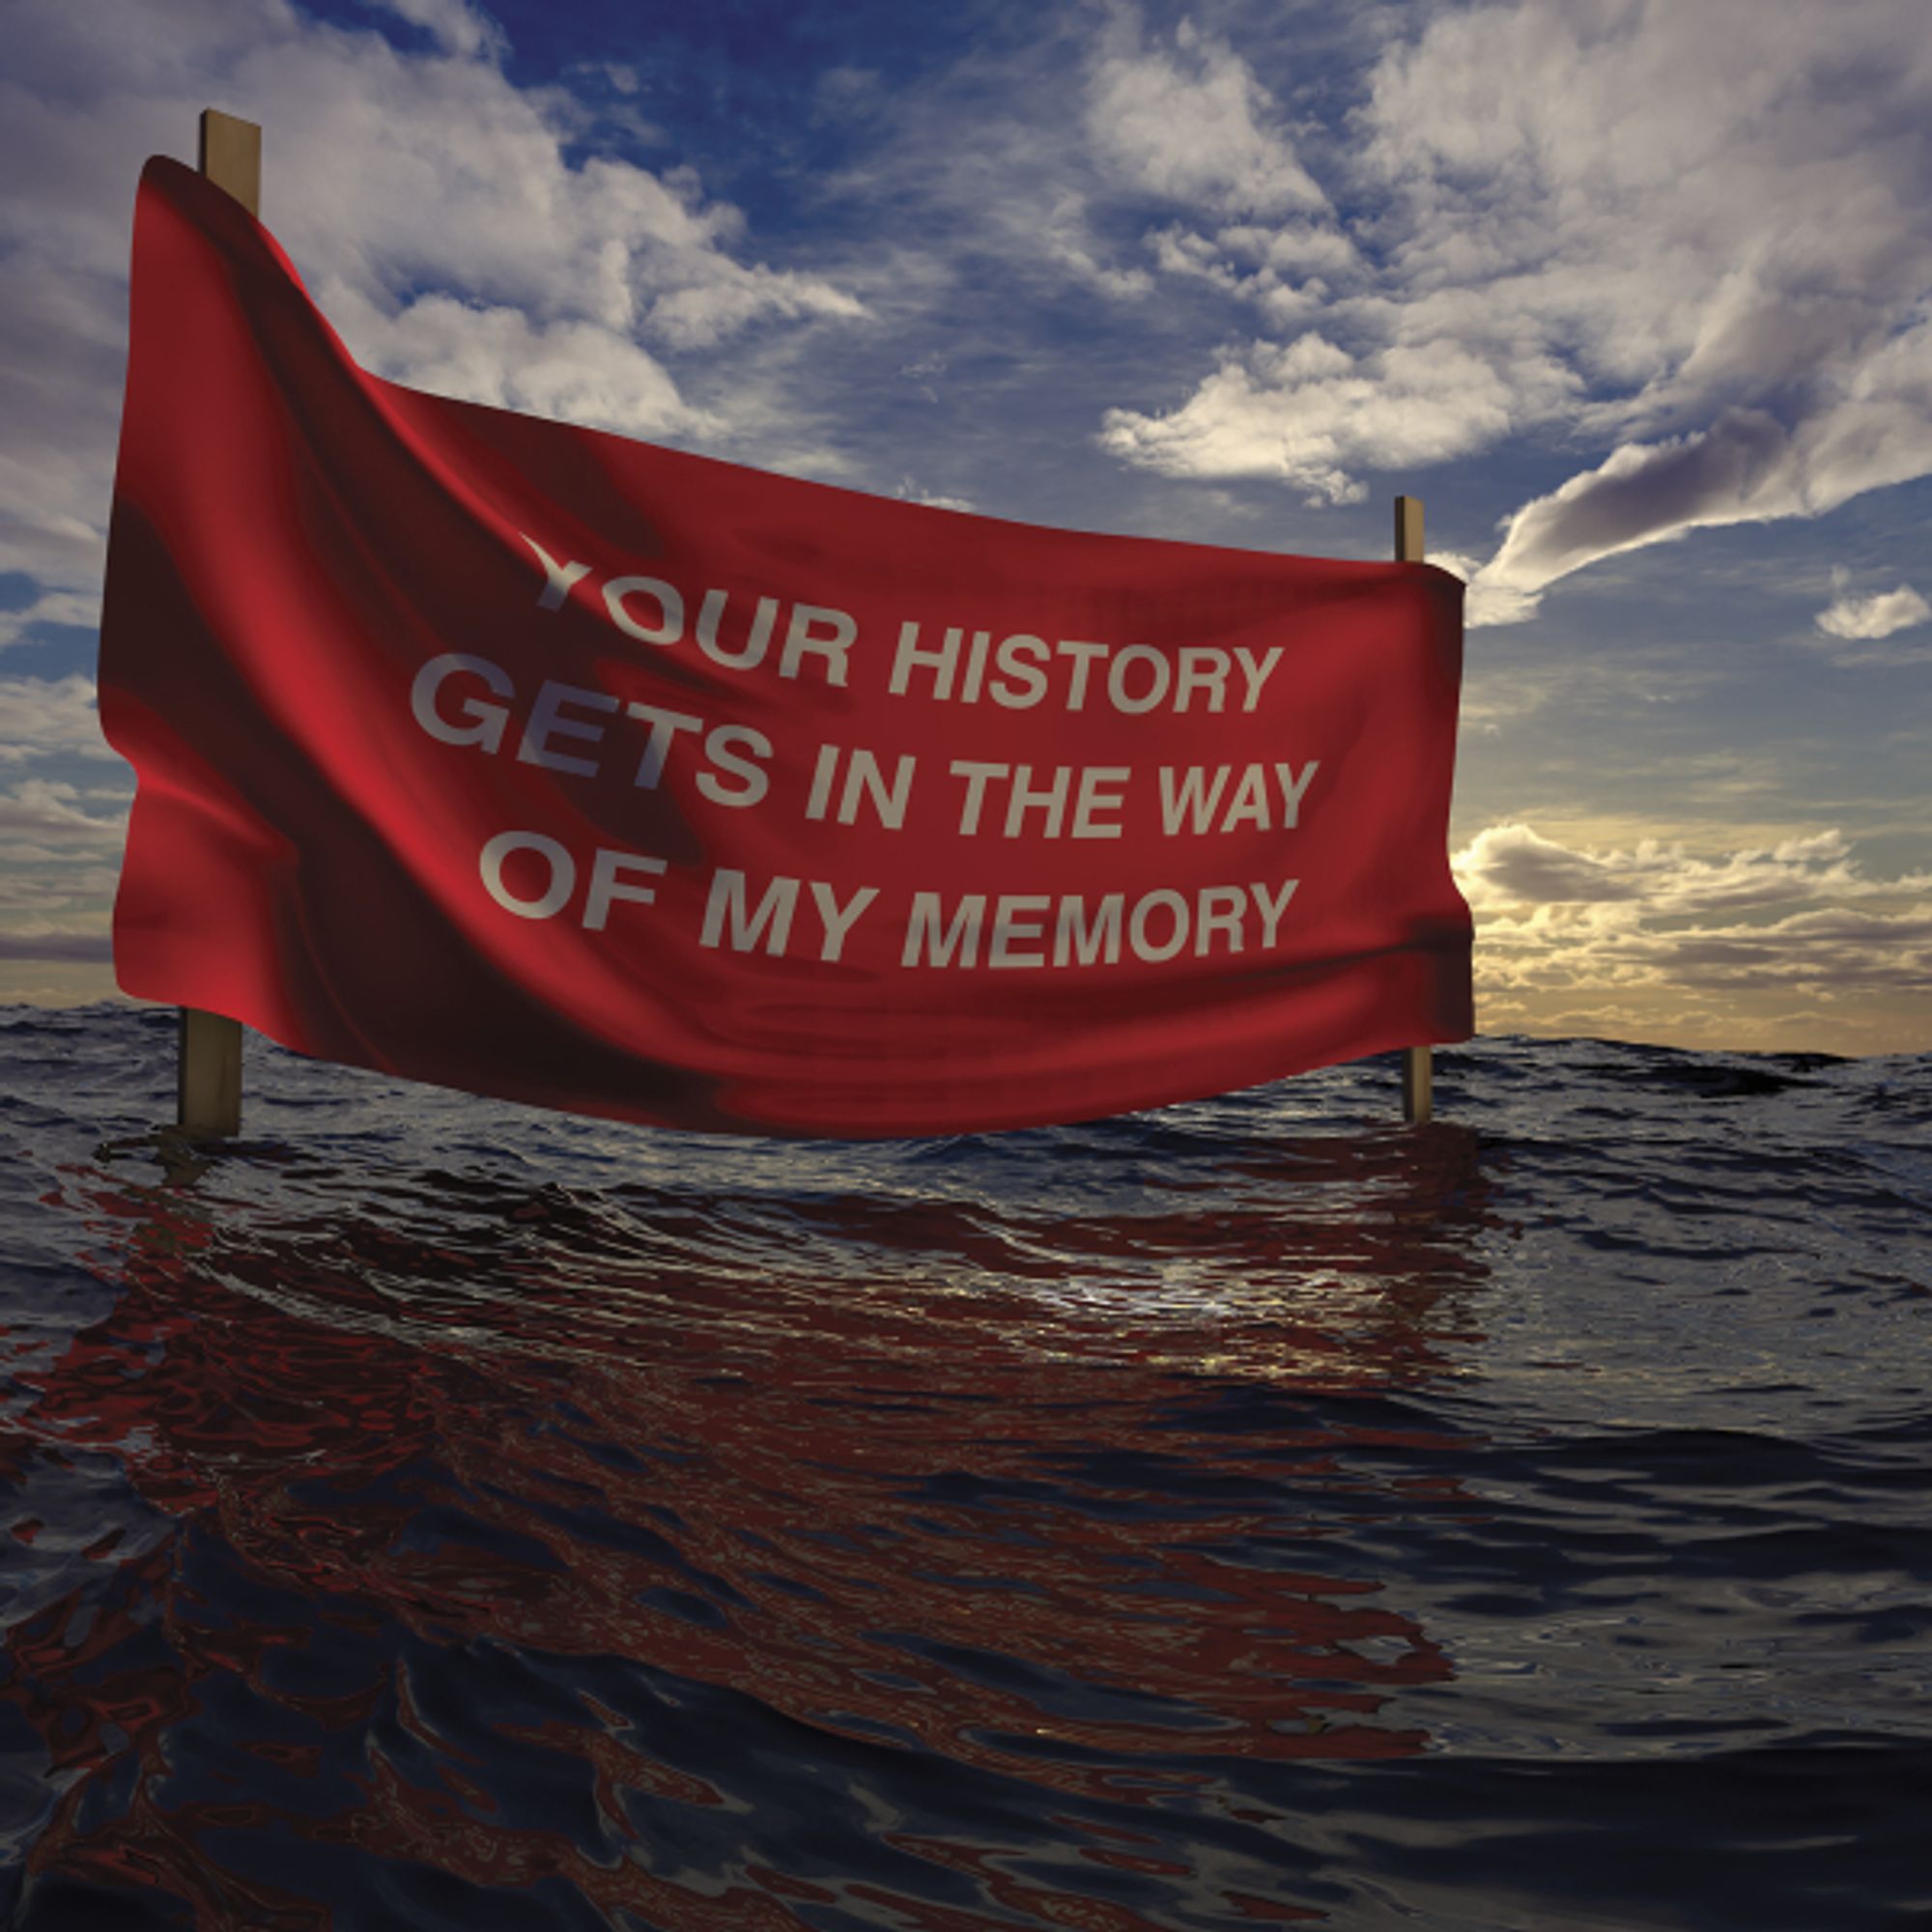 red banner with the text "your history gets in the way of my memory"